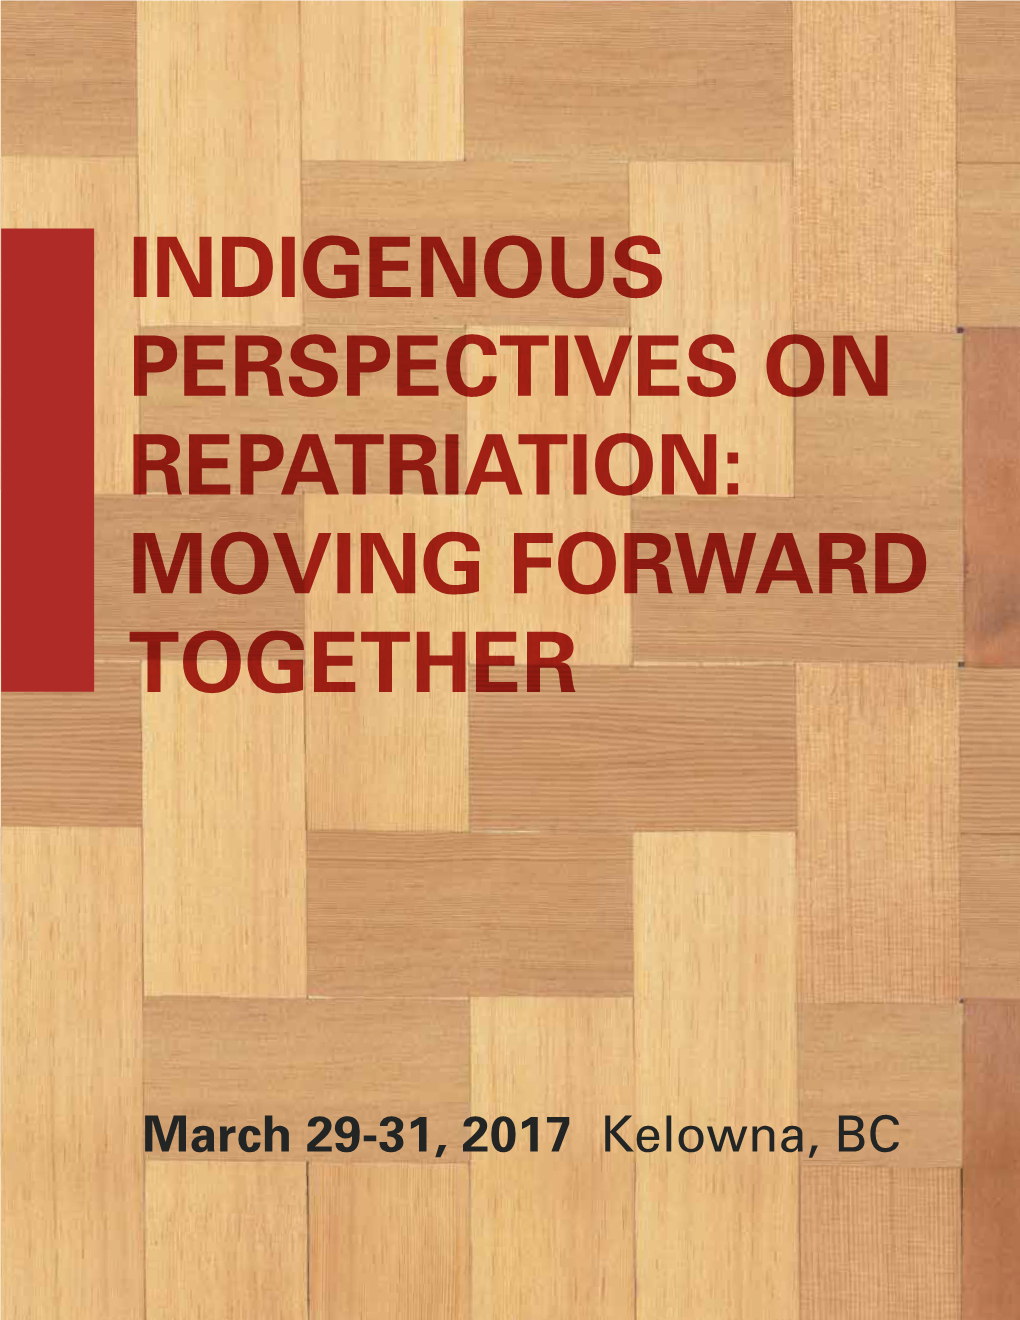 Indigenous Perspectives on Repatriation: Moving Forward Together